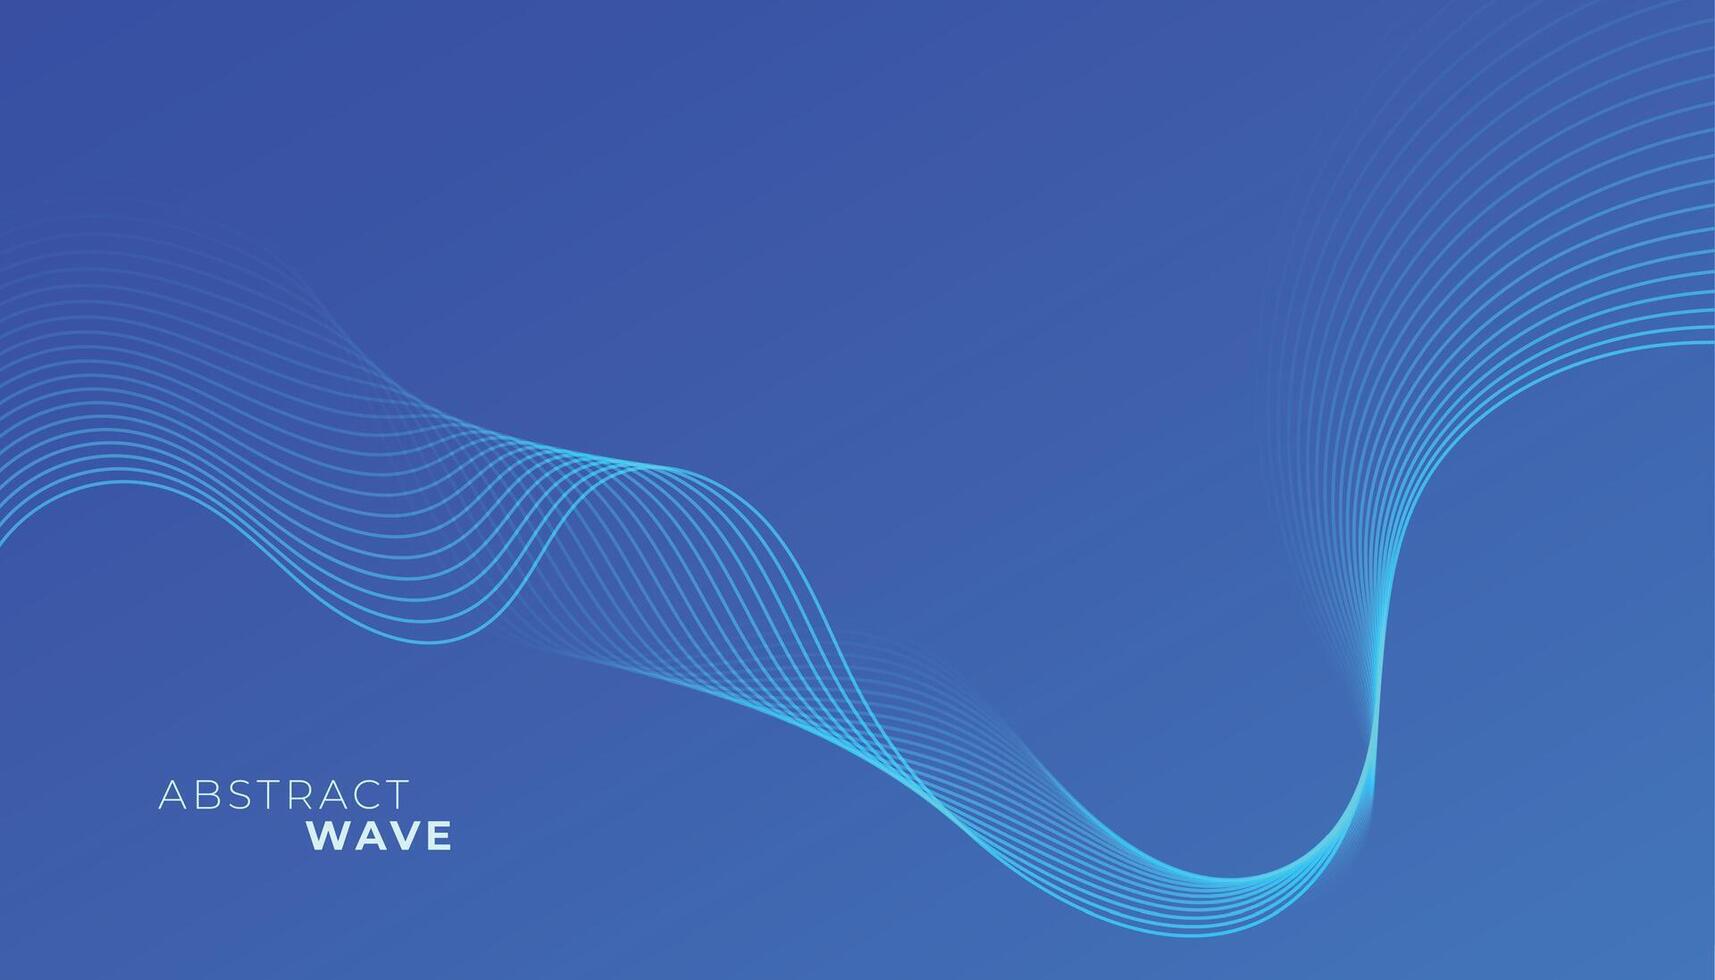 line style abstract wave with curvy and smooth movement background vector